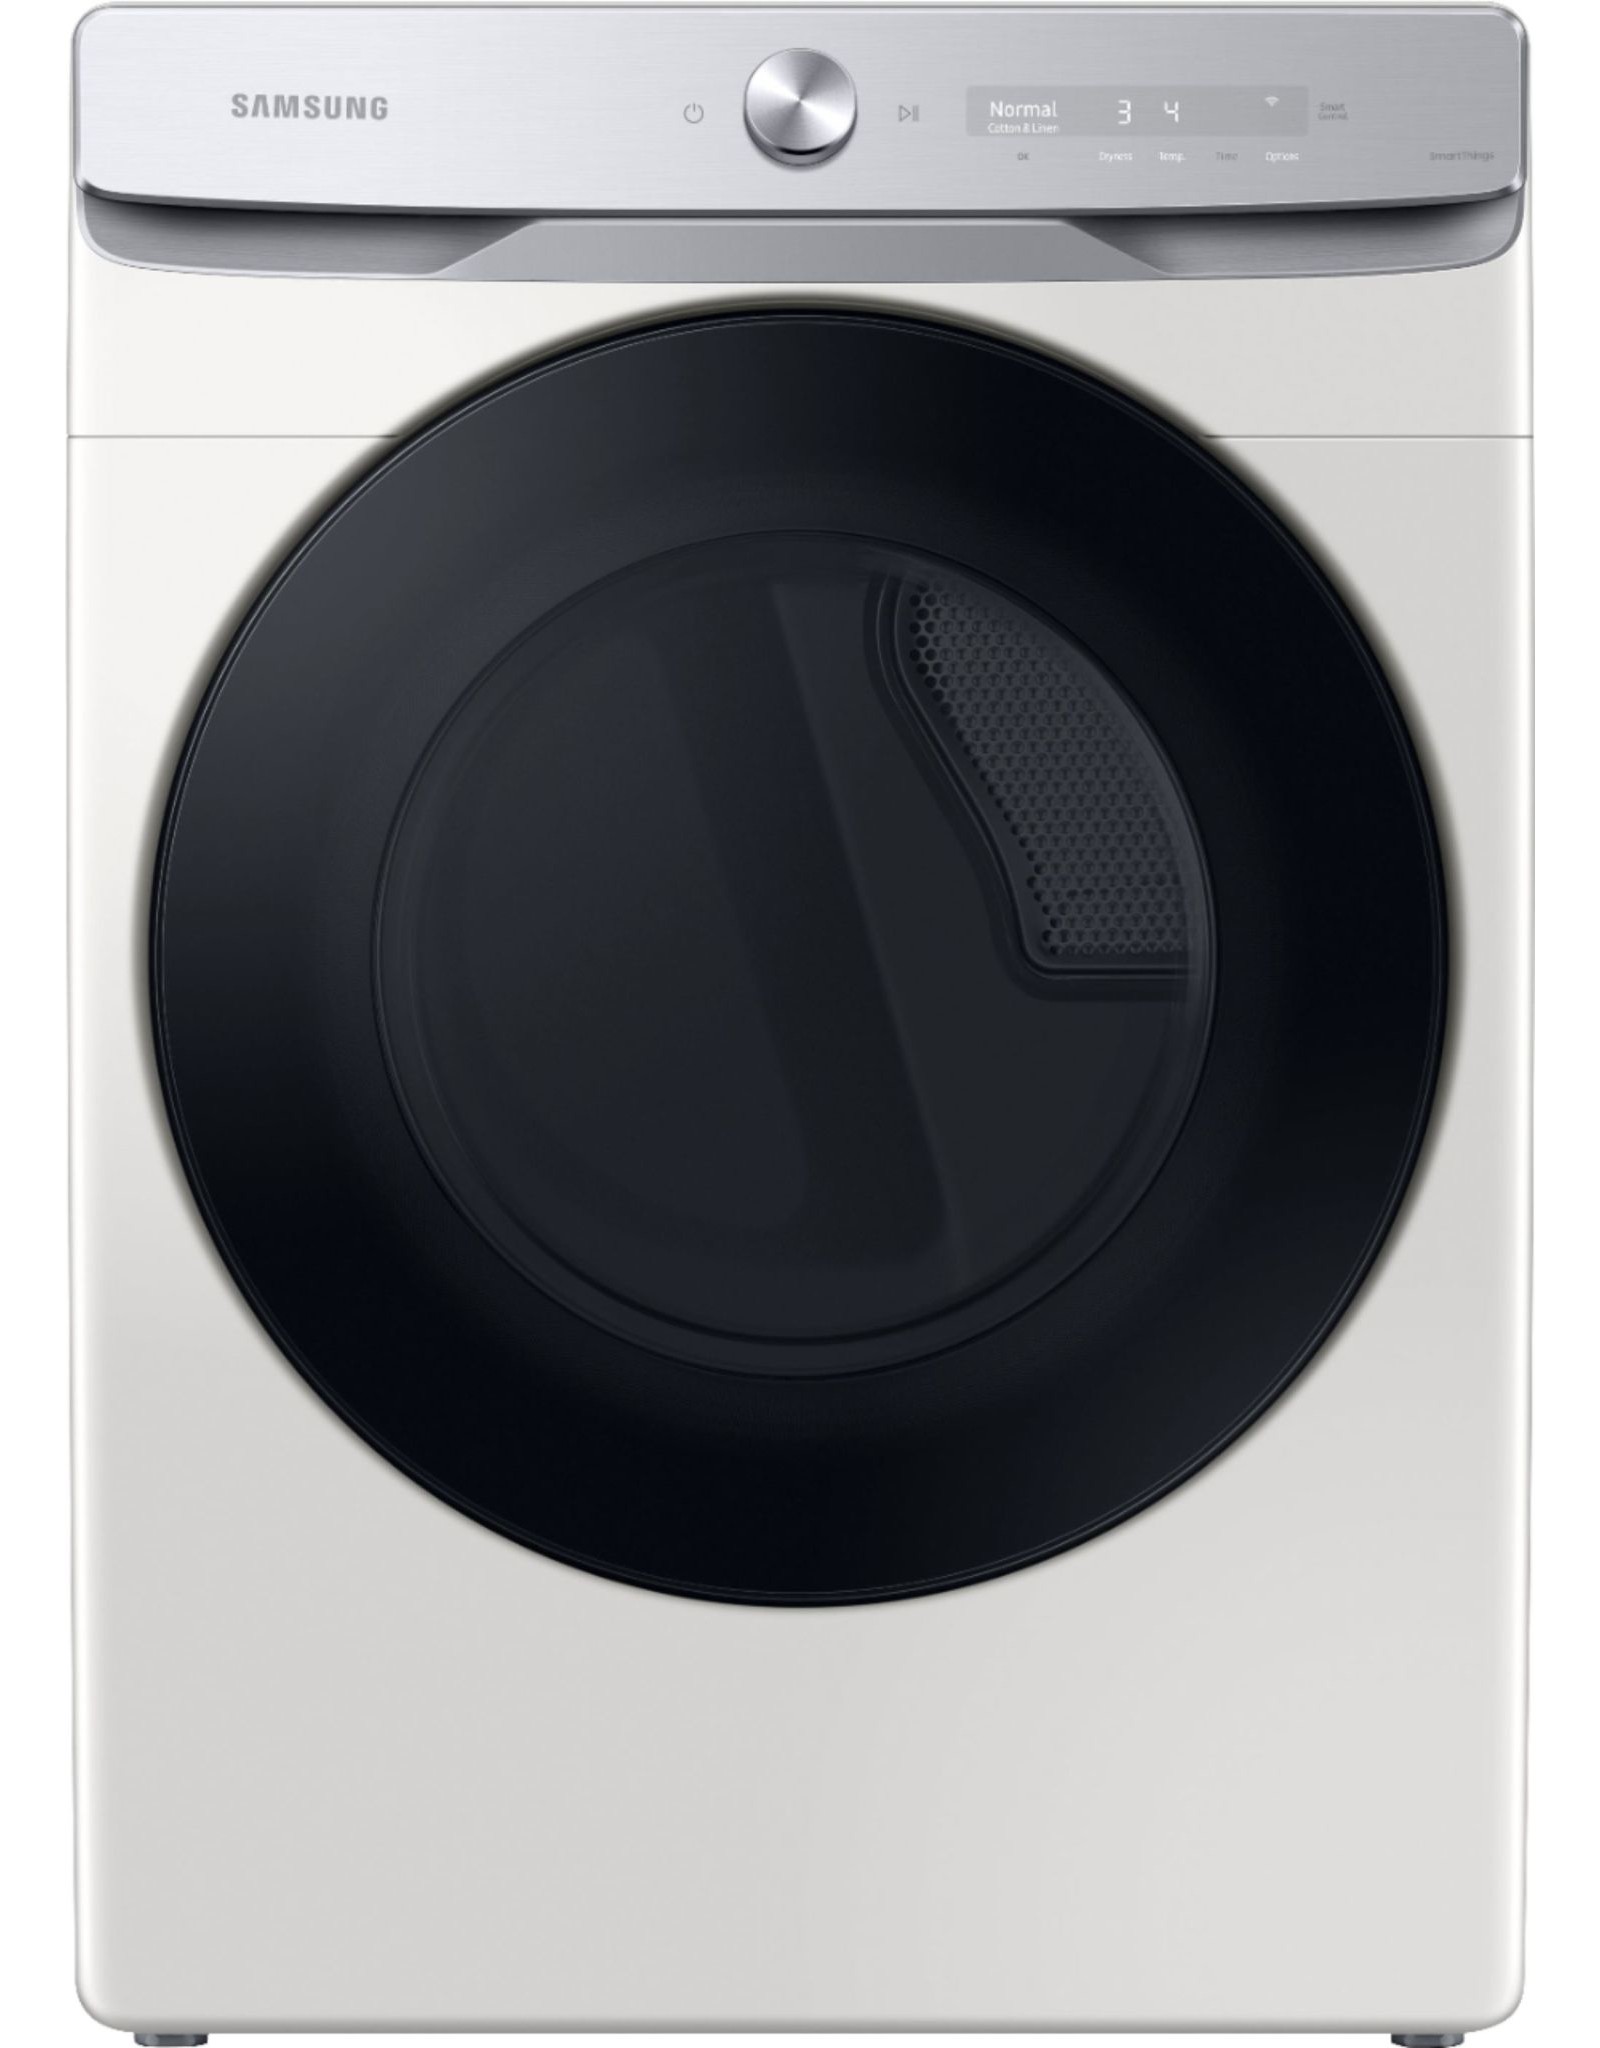 SAMSUNG 7.5 cu. ft. 240-Volt Ivory Electric Dryer with Smart Dial and Super Speed Dry, ENERGY STAR